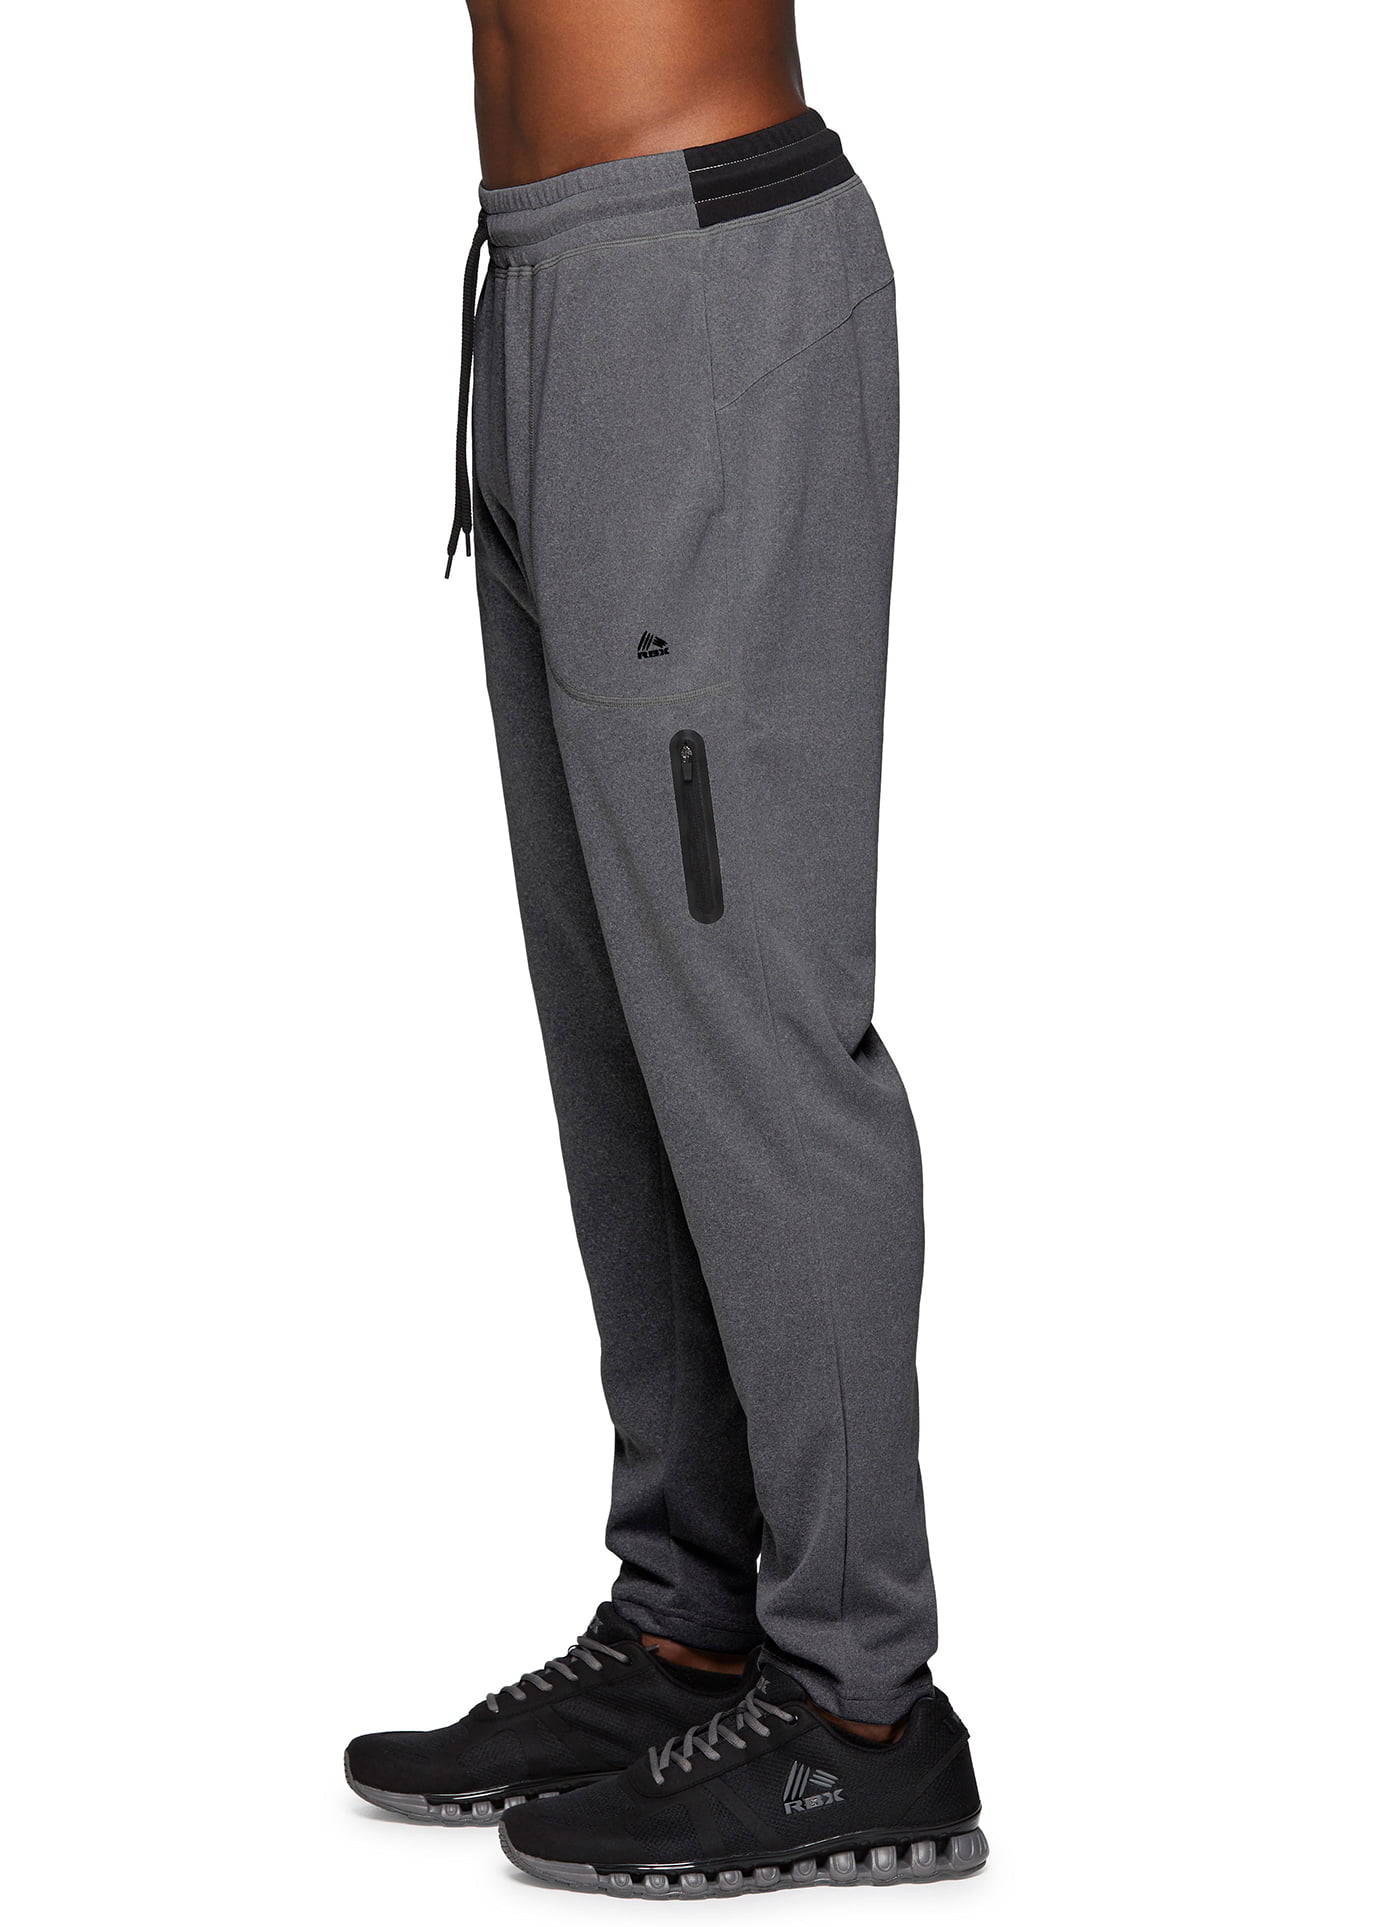 RBX Active Men's Tapered Leg Lightweight Jogger Pant With Pockets 